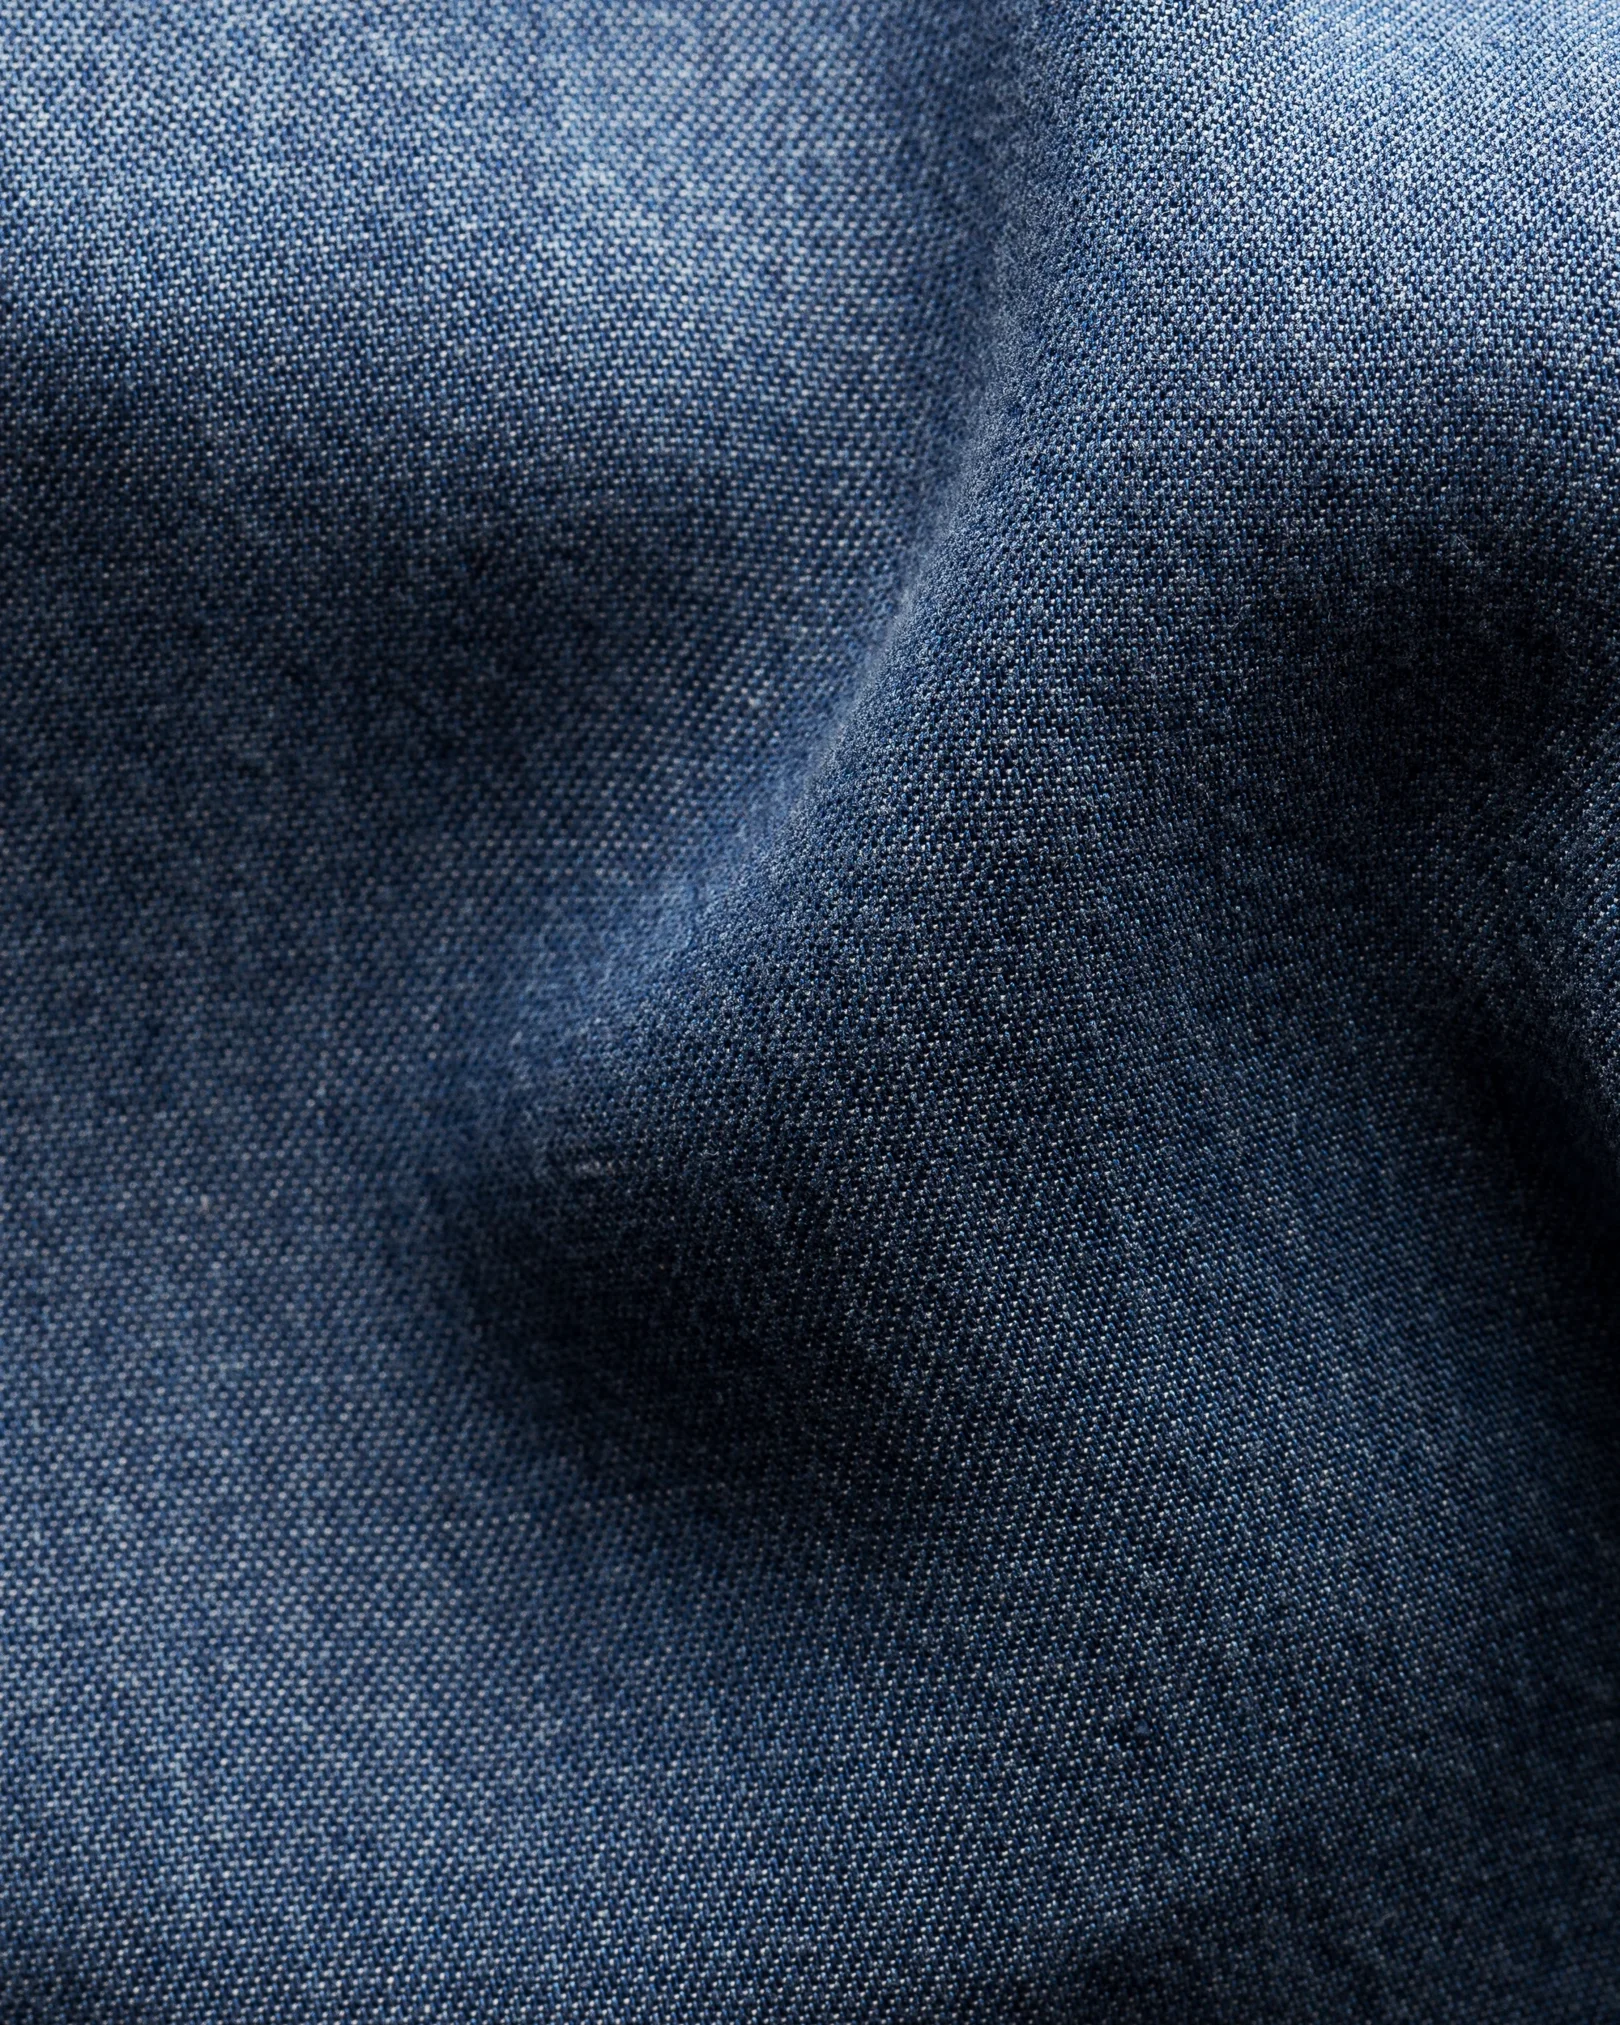 hand sourced denim swatches by thesaucesuppliers.com supplier of custom  made headwear and custom accessories | Denim texture, Denim fabric, Fabric  swatches